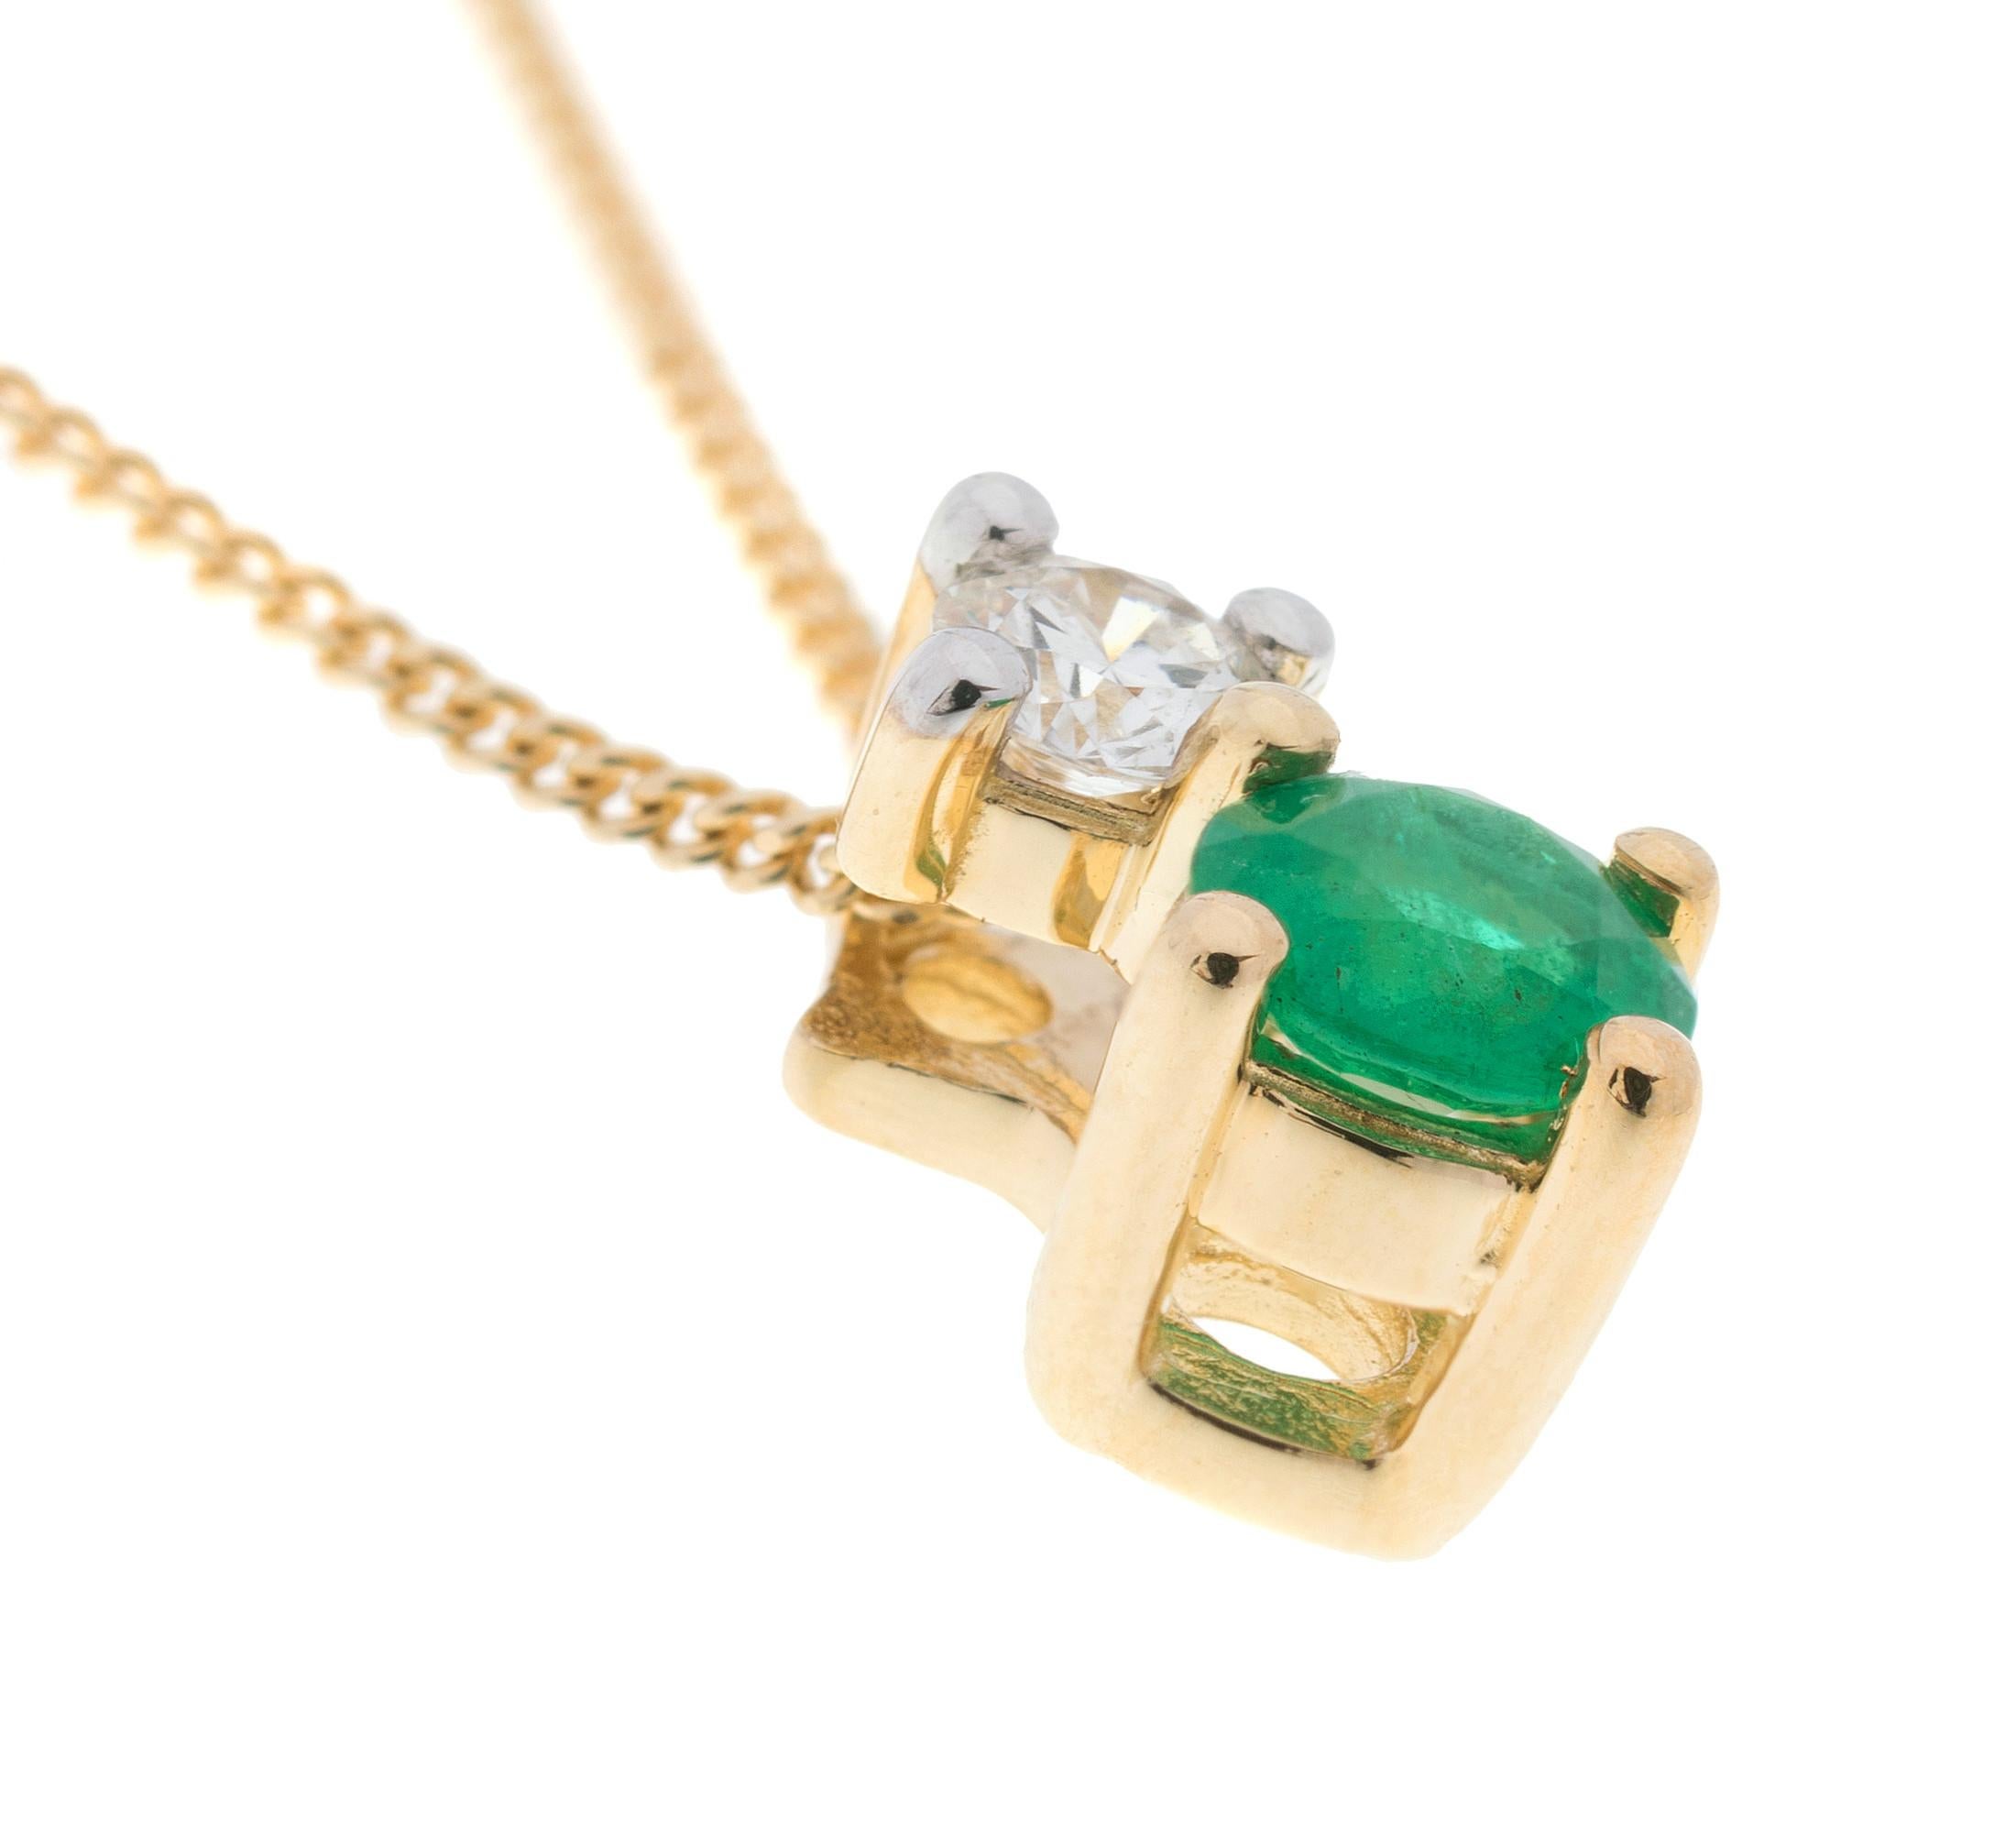 This gorgeous ladies emerald diamond pendant.. a thoughtful jewellery gift for a May birthday or simply a special occasion.

Featuring a vivid emerald, suspended from a twinkling diamond surmount. A simply lovely piece that will bring a splash of